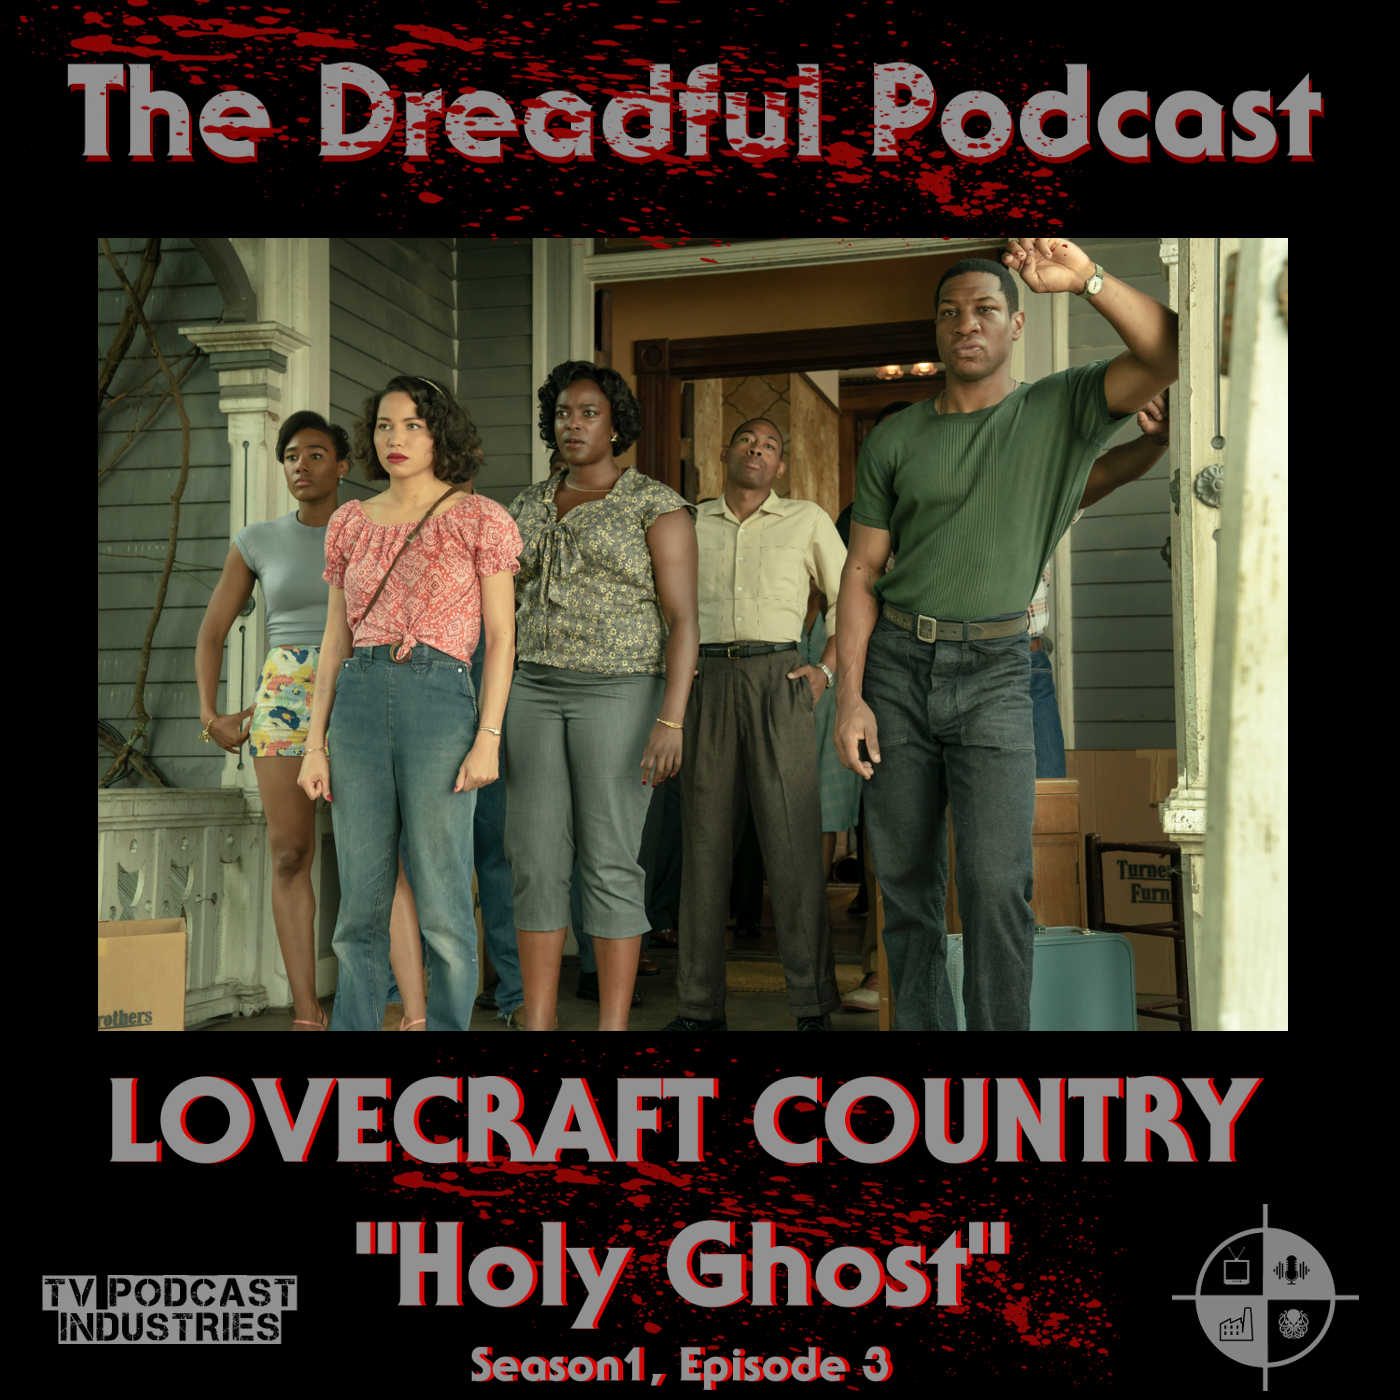 Lovecraft Country Podcast Episode 3 “Holy Ghost”